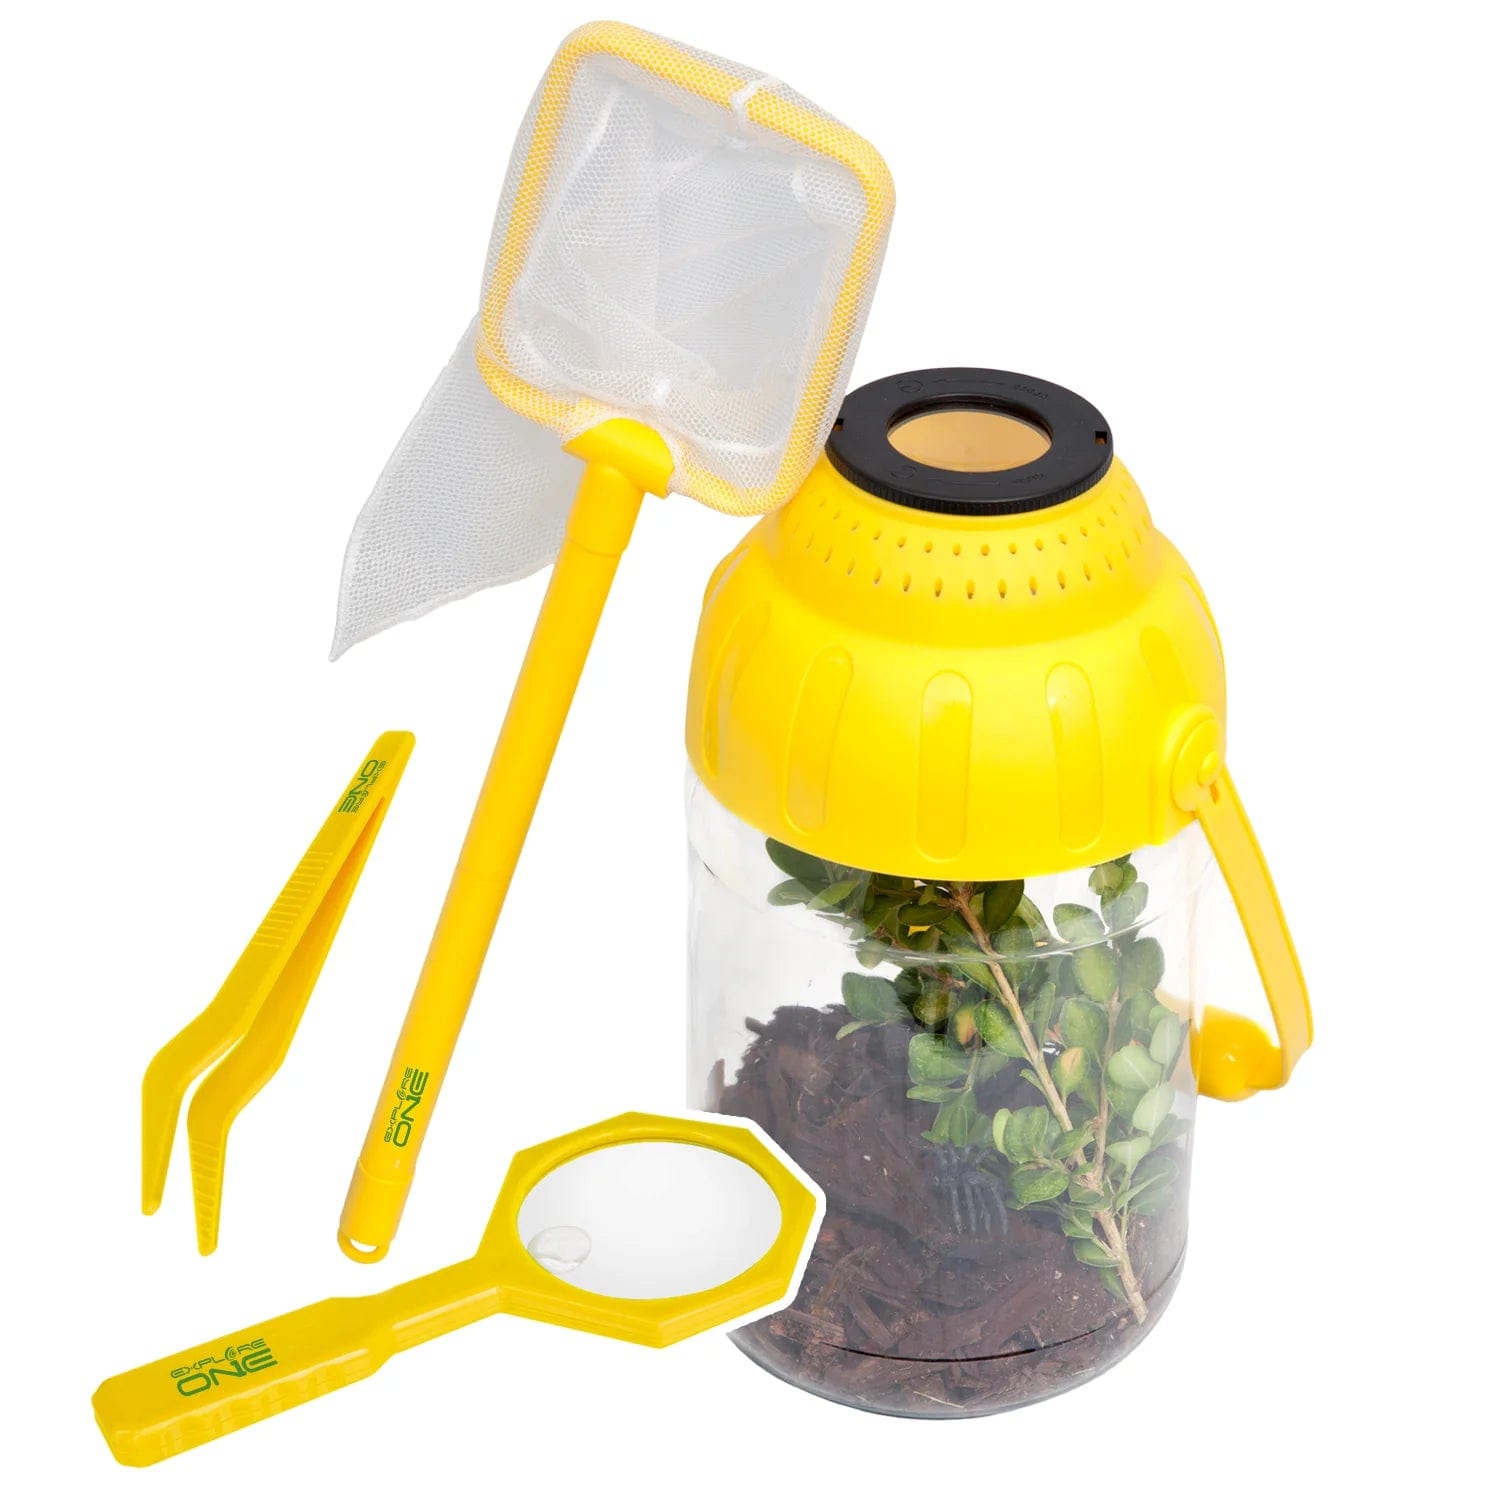 Explore One Toy Explore One Land & Water Habitat Bug Collector - 88-25000